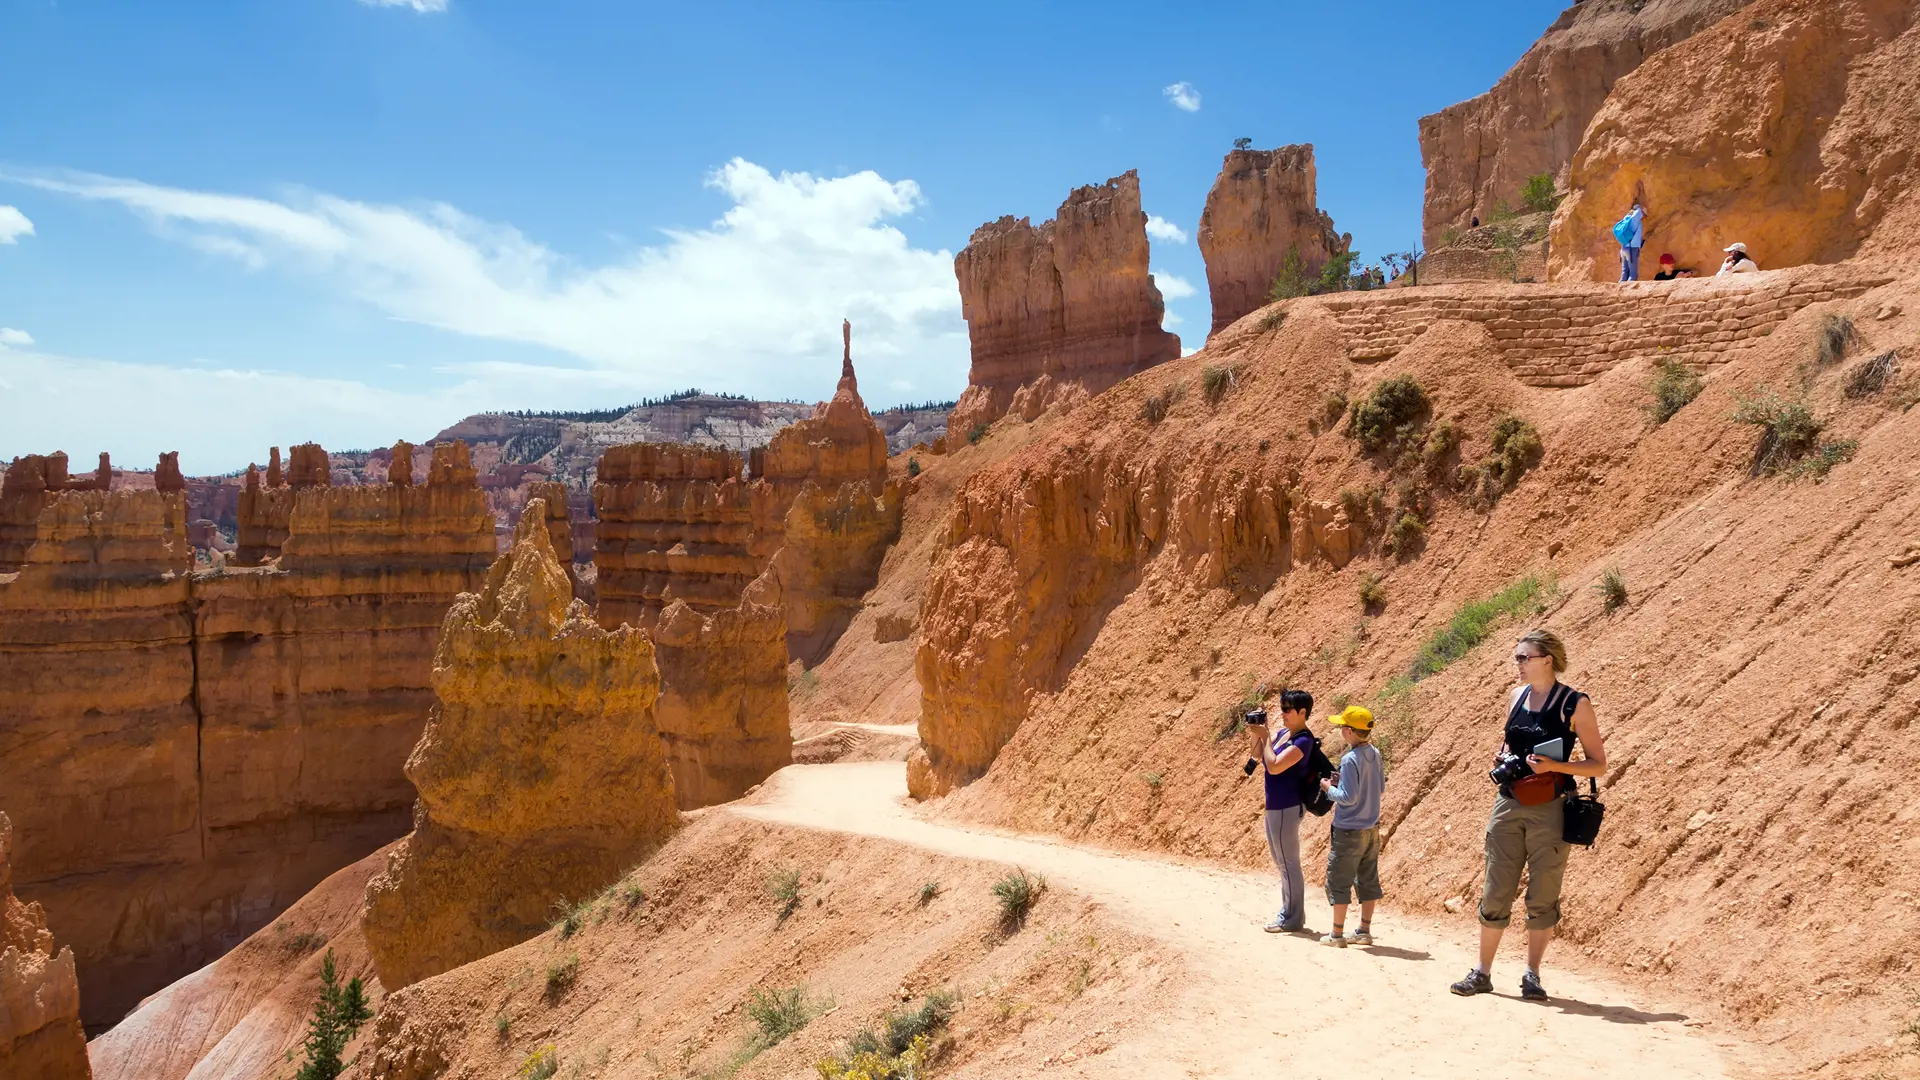 shutterstock_325312529 Adults with children on the trail. Bryce Canyon National Park, Utah, USA.jpg